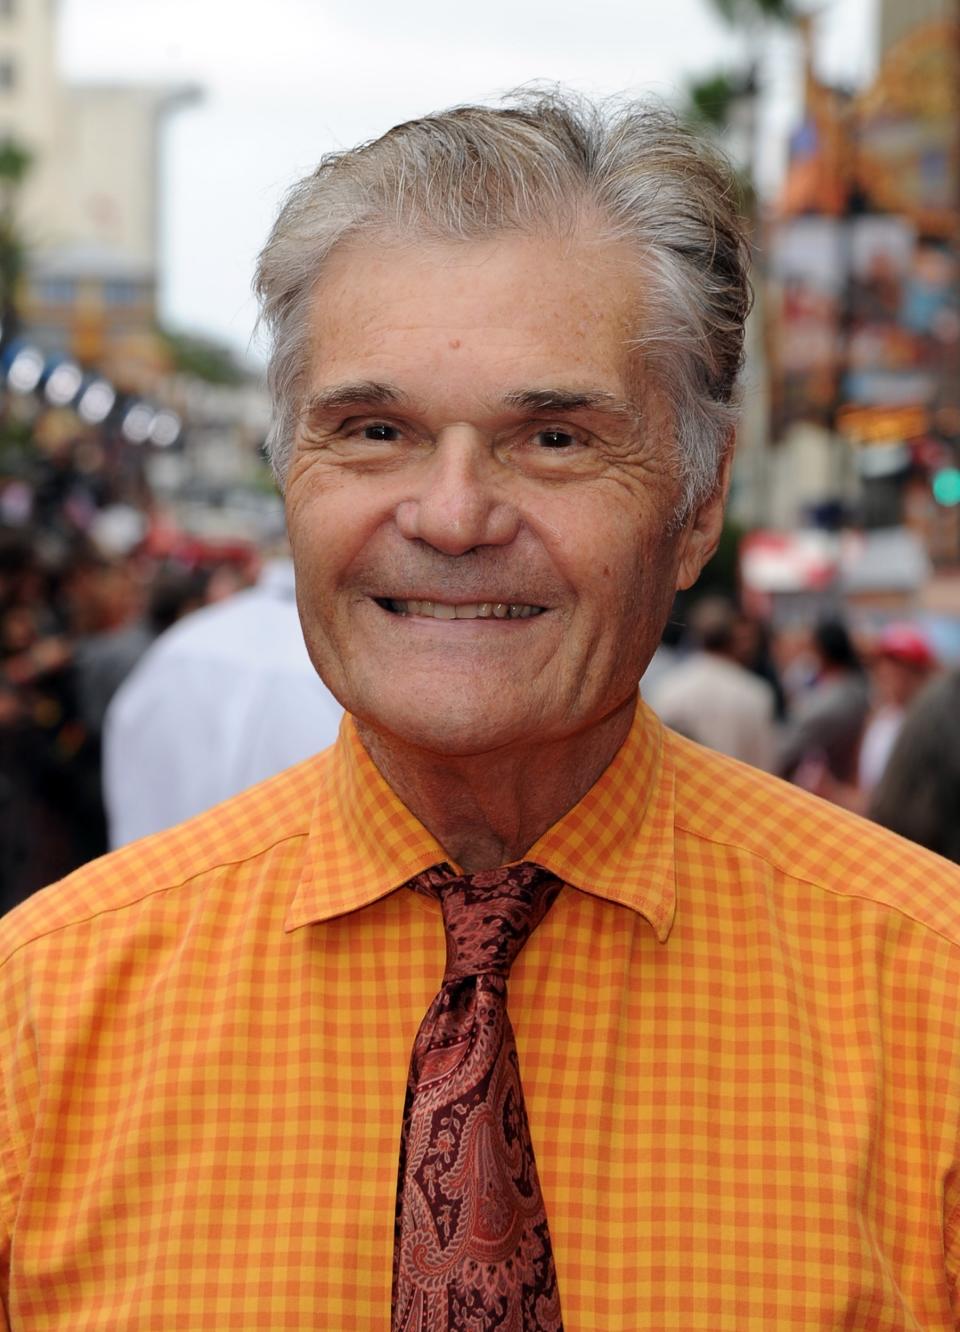 Willard attending a premiere in Hollywood in 2014(Getty Images)